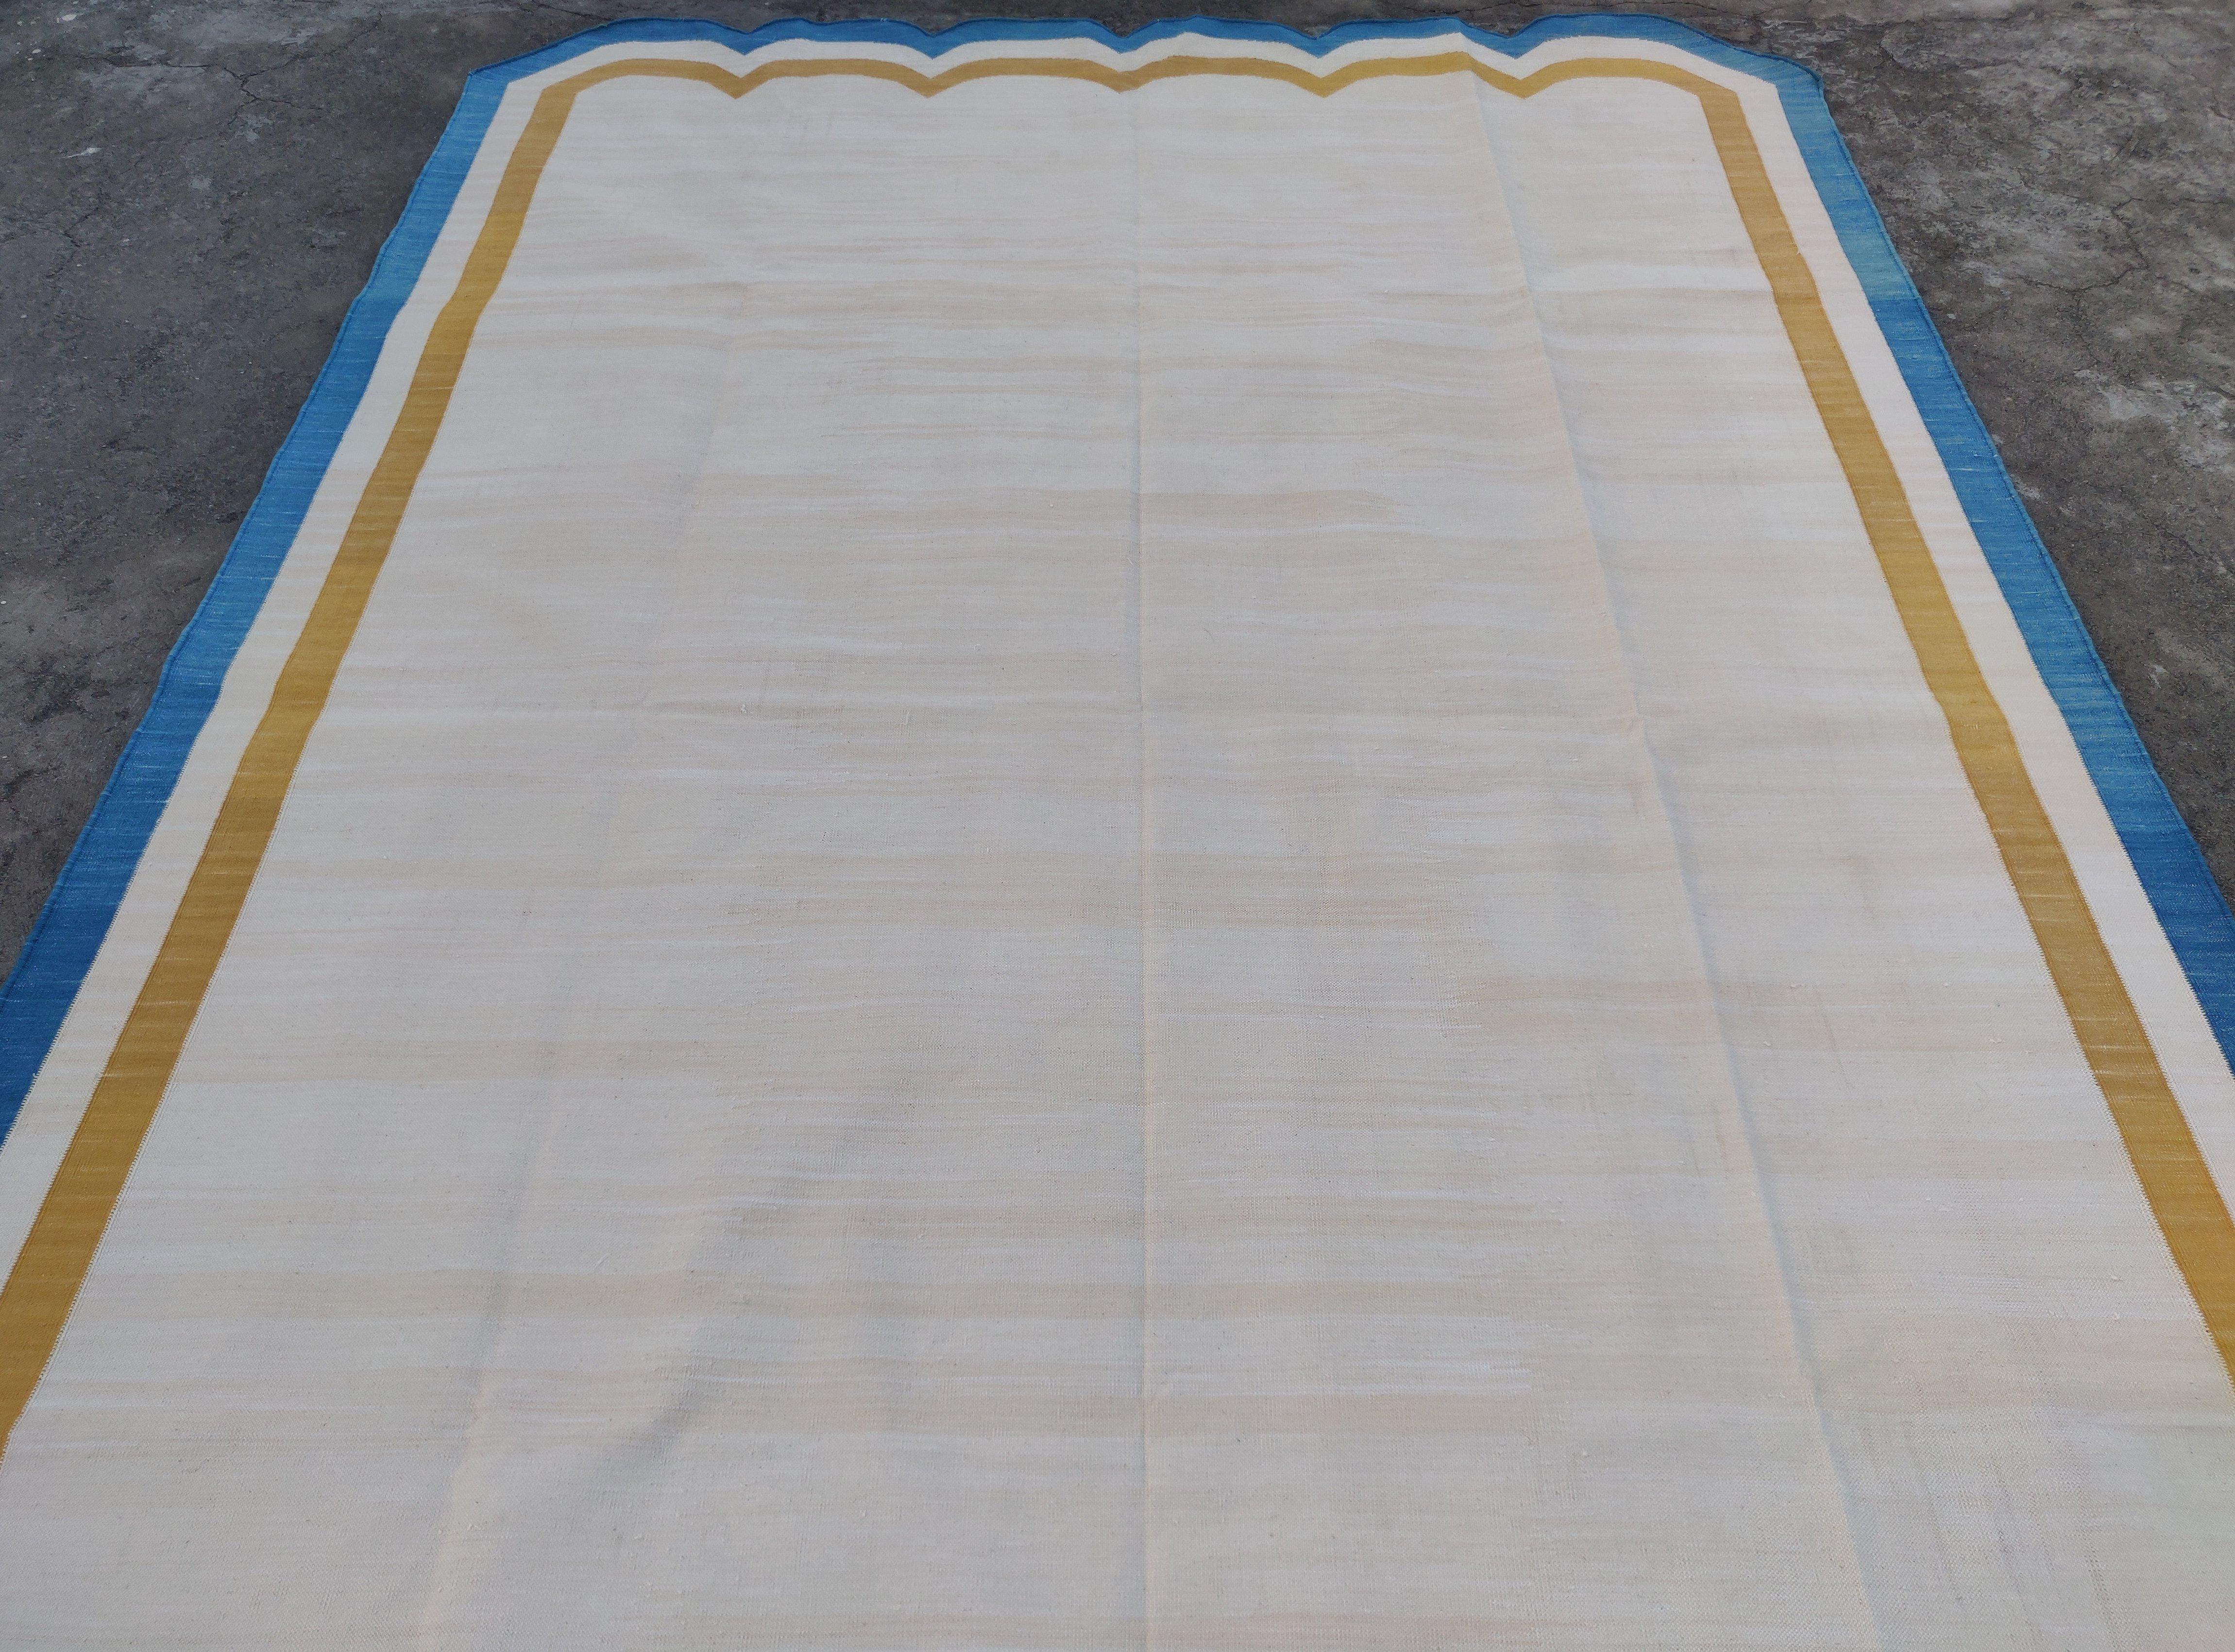 Handmade Cotton Area Flat Weave Rug, 6x9 Cream And Blue Scalloped Kilim Dhurrie In New Condition For Sale In Jaipur, IN